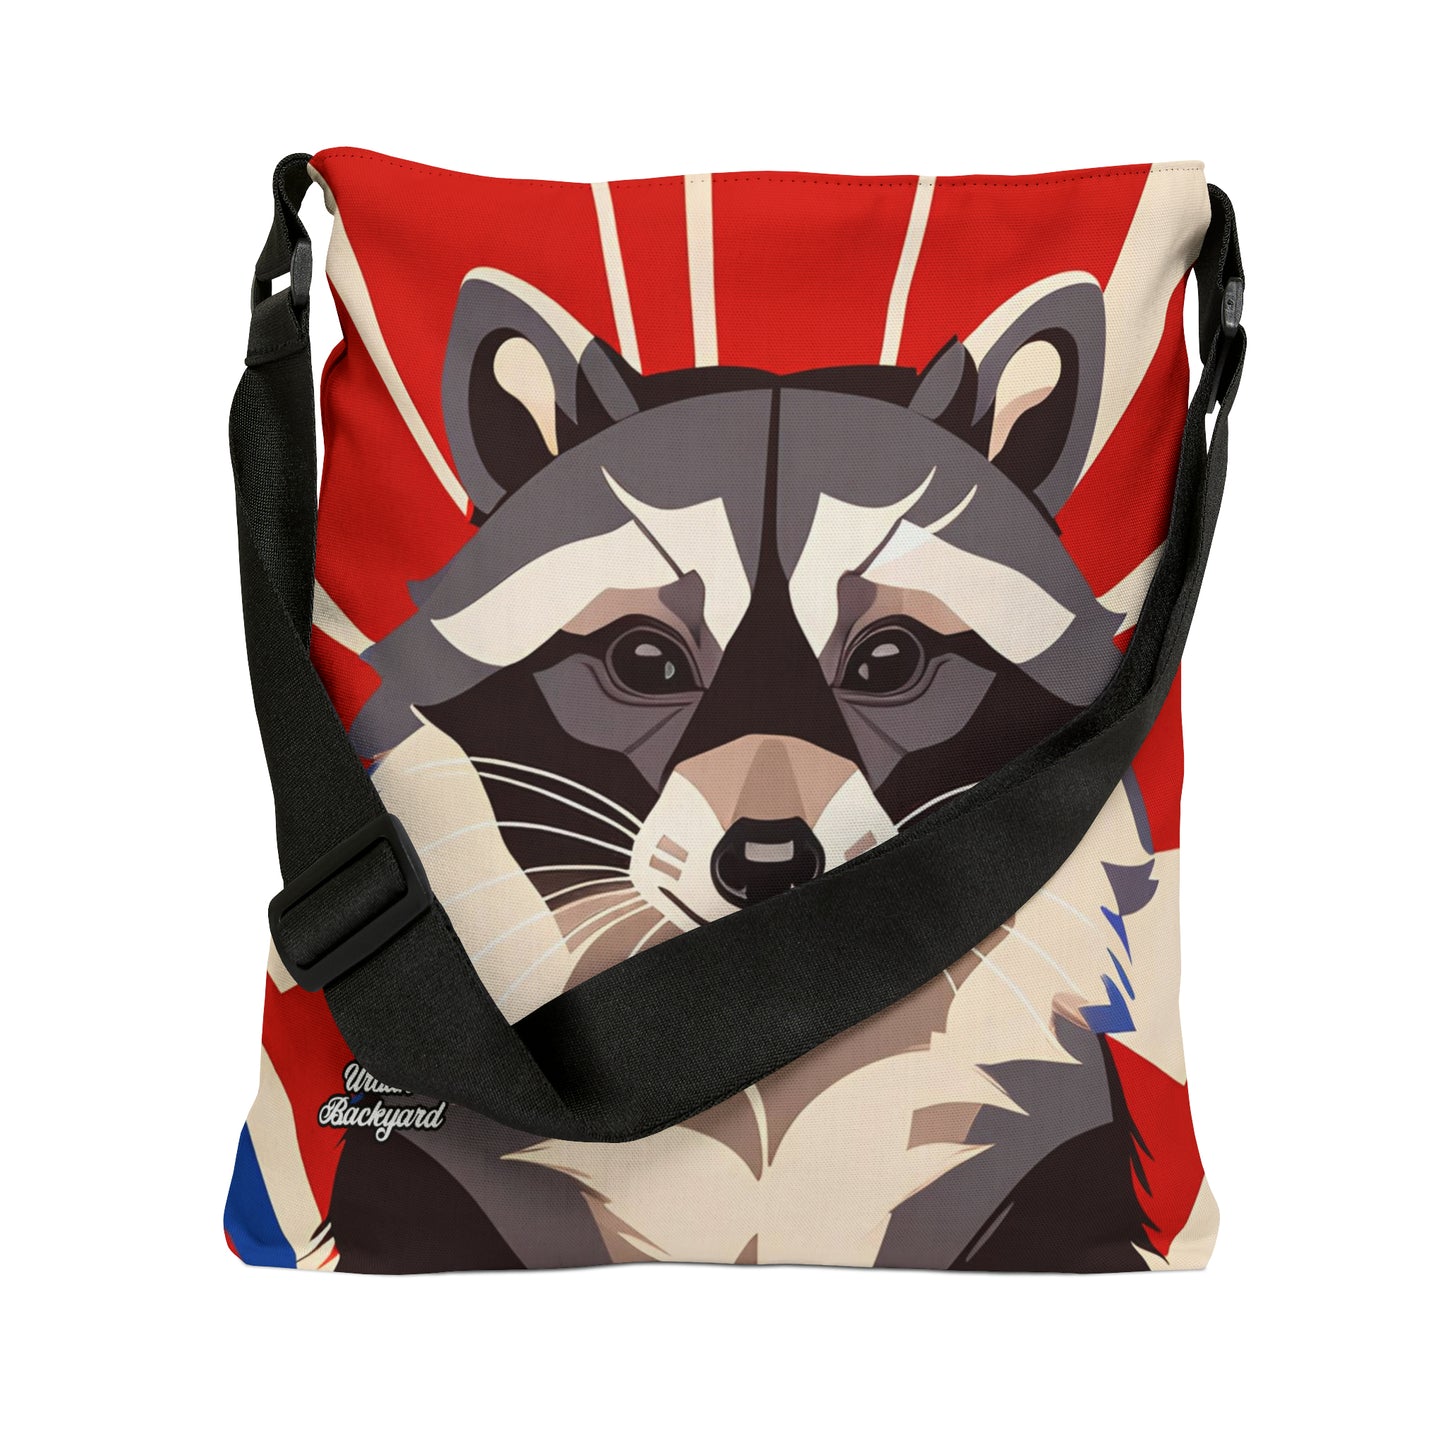 Raccoon on Art Deco Rays, Tote Bag with Adjustable Strap - Trendy and Versatile